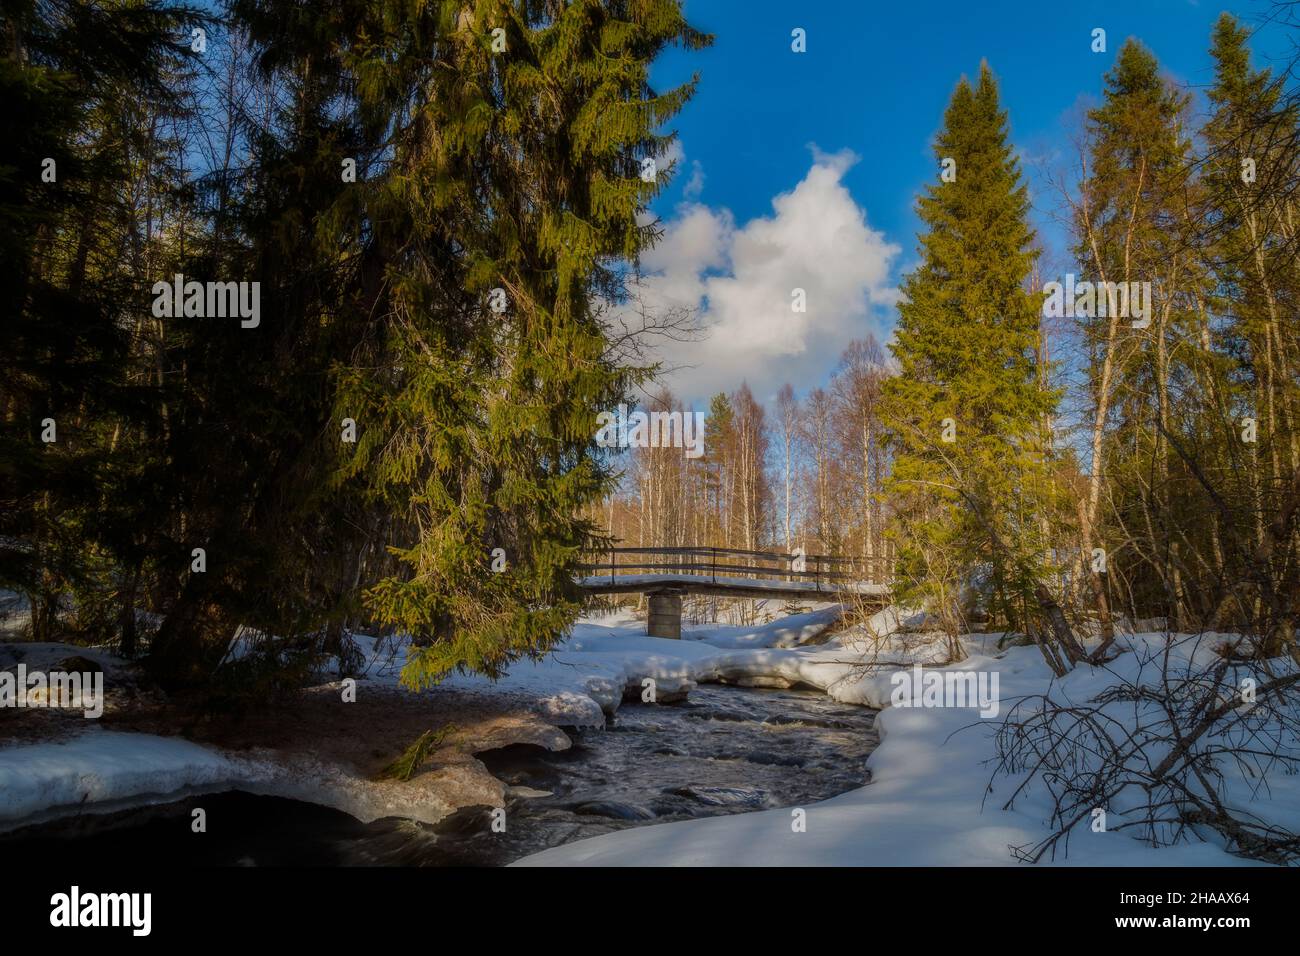 bridge and a river with ice and snow in a forest Stock Photo